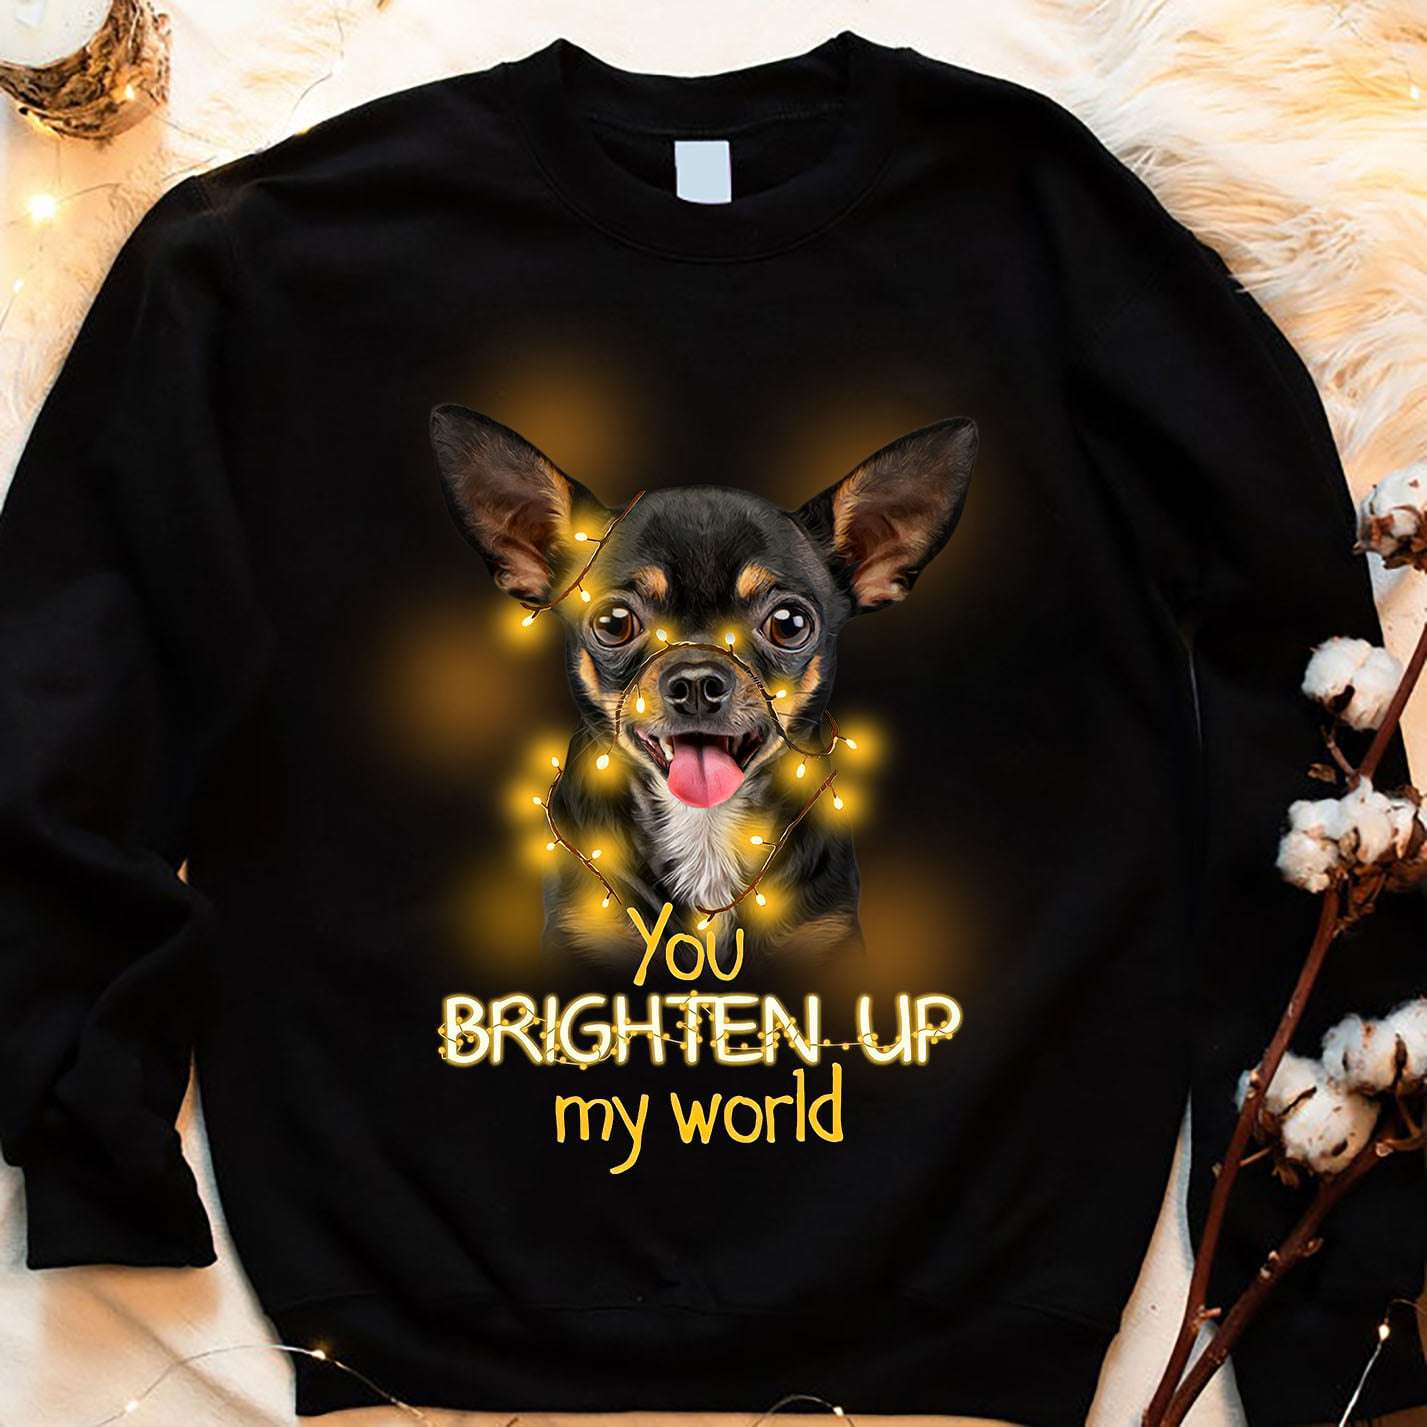 Chihuahua And Fairy Lights - You brighten up my world